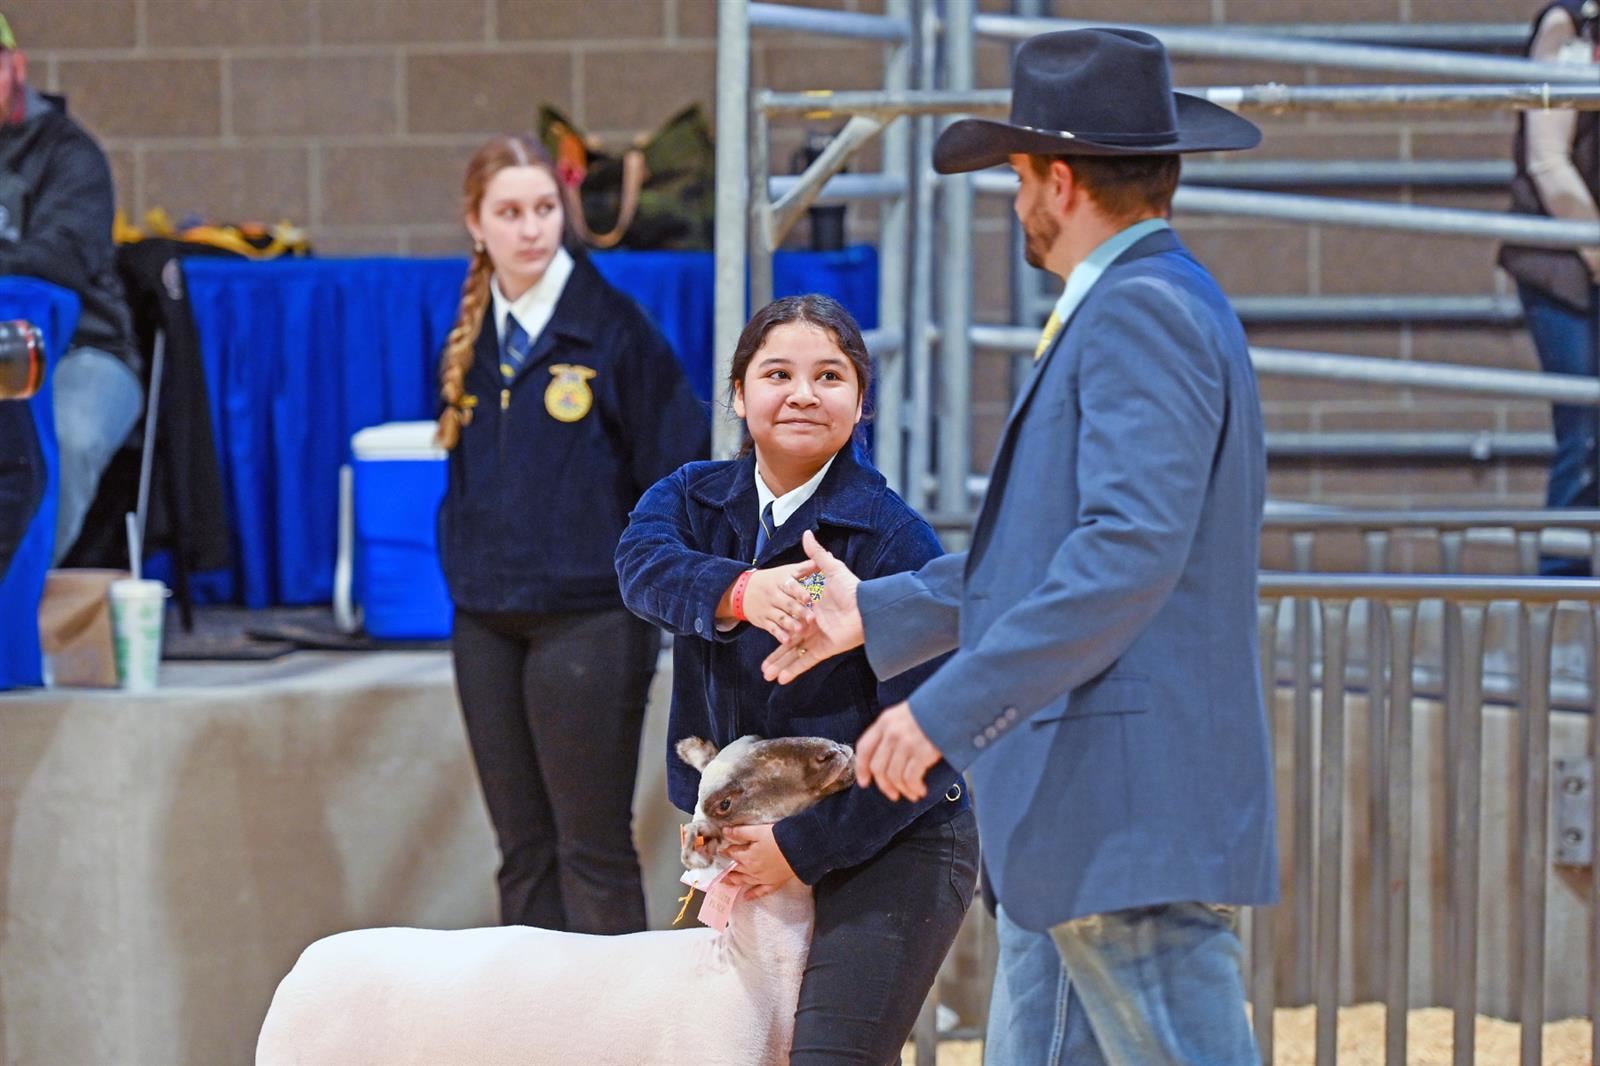 student projects generated more than $760,000 at the 29th annual CFISD Livestock Show & Sale, Feb. 2-4;